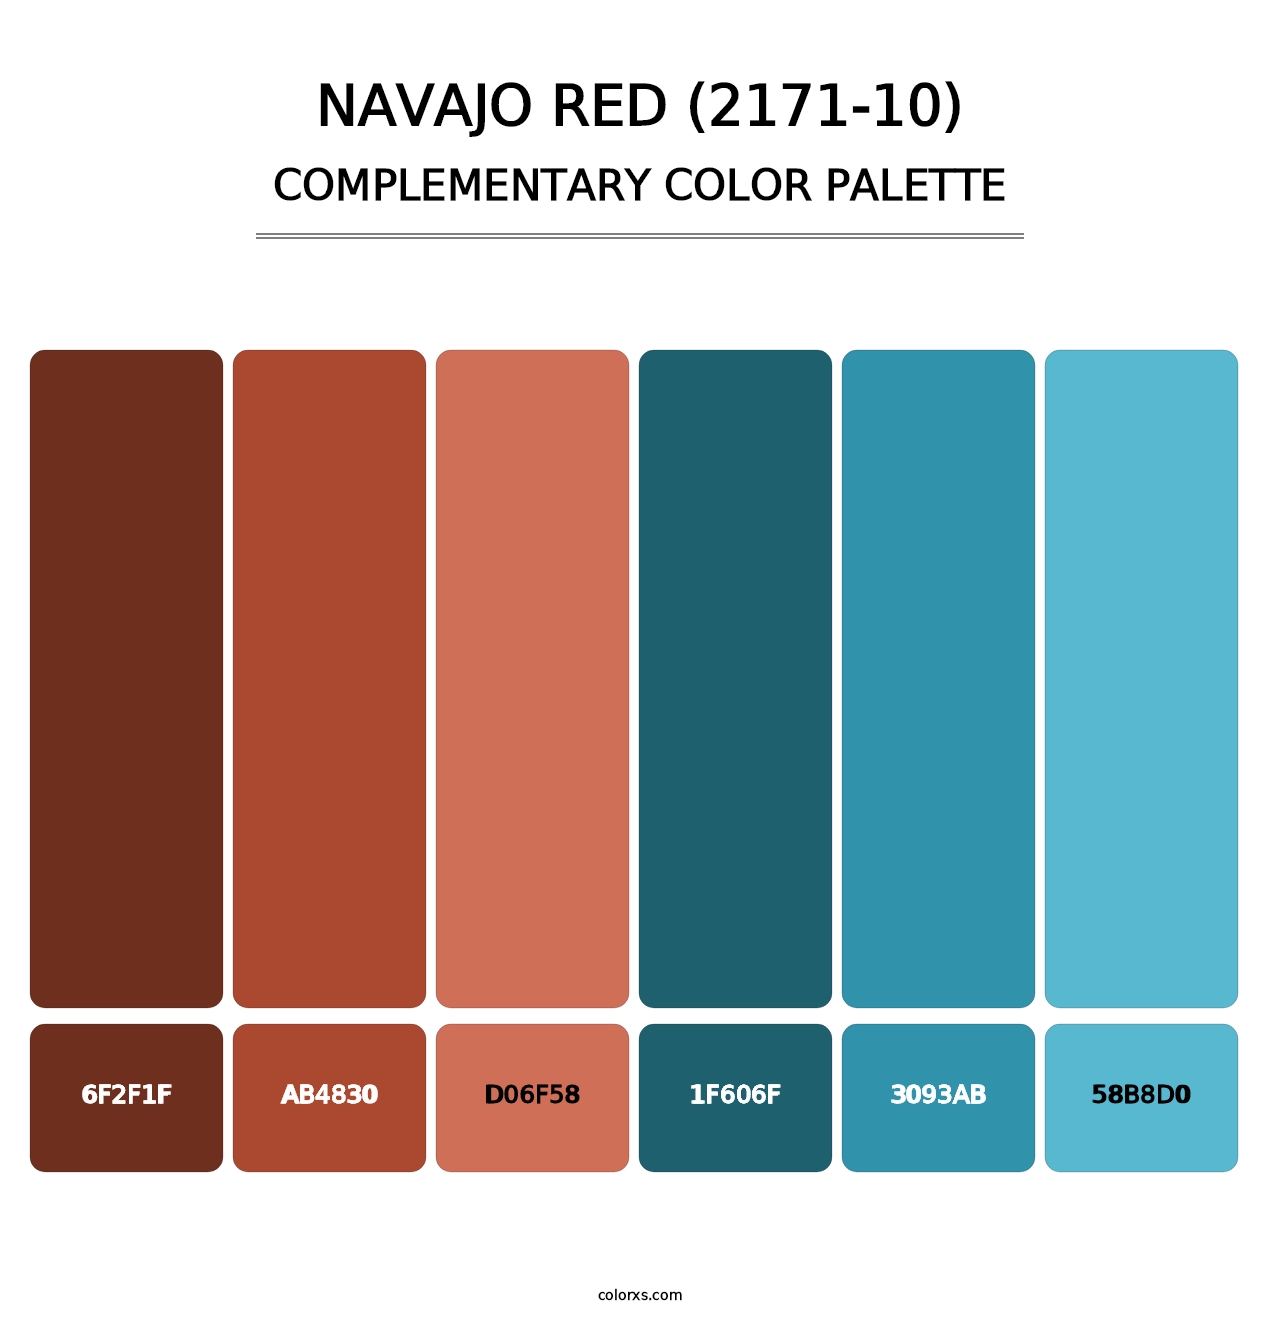 Navajo Red (2171-10) - Complementary Color Palette